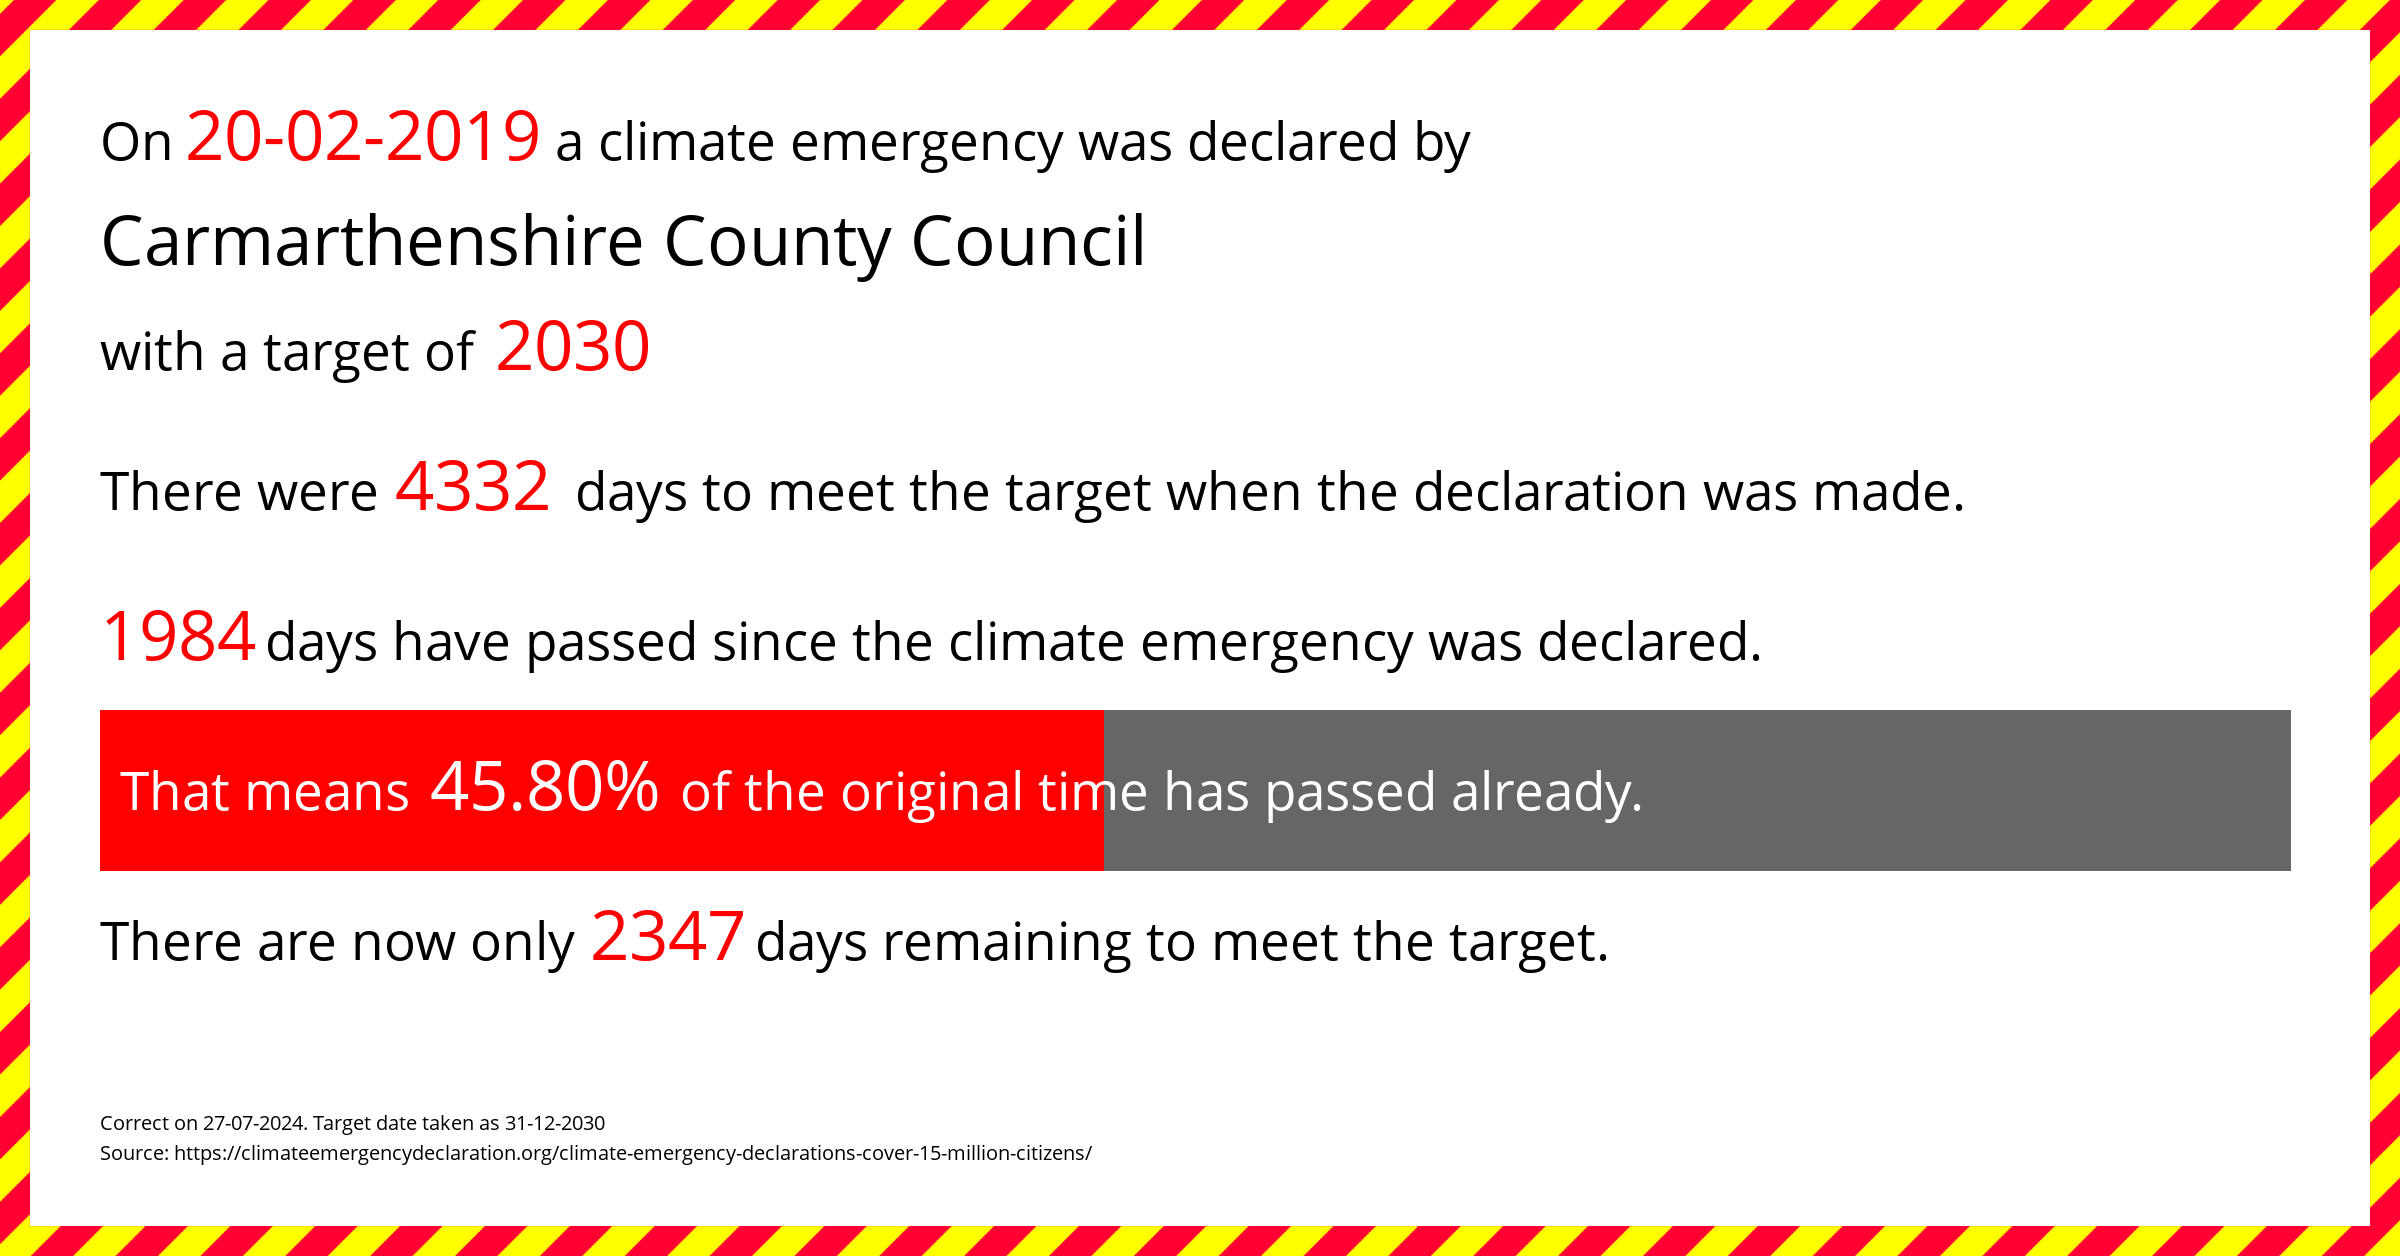 Carmarthenshire County Council declared a Climate emergency on Wednesday 20th February 2019, with a target of 2030.